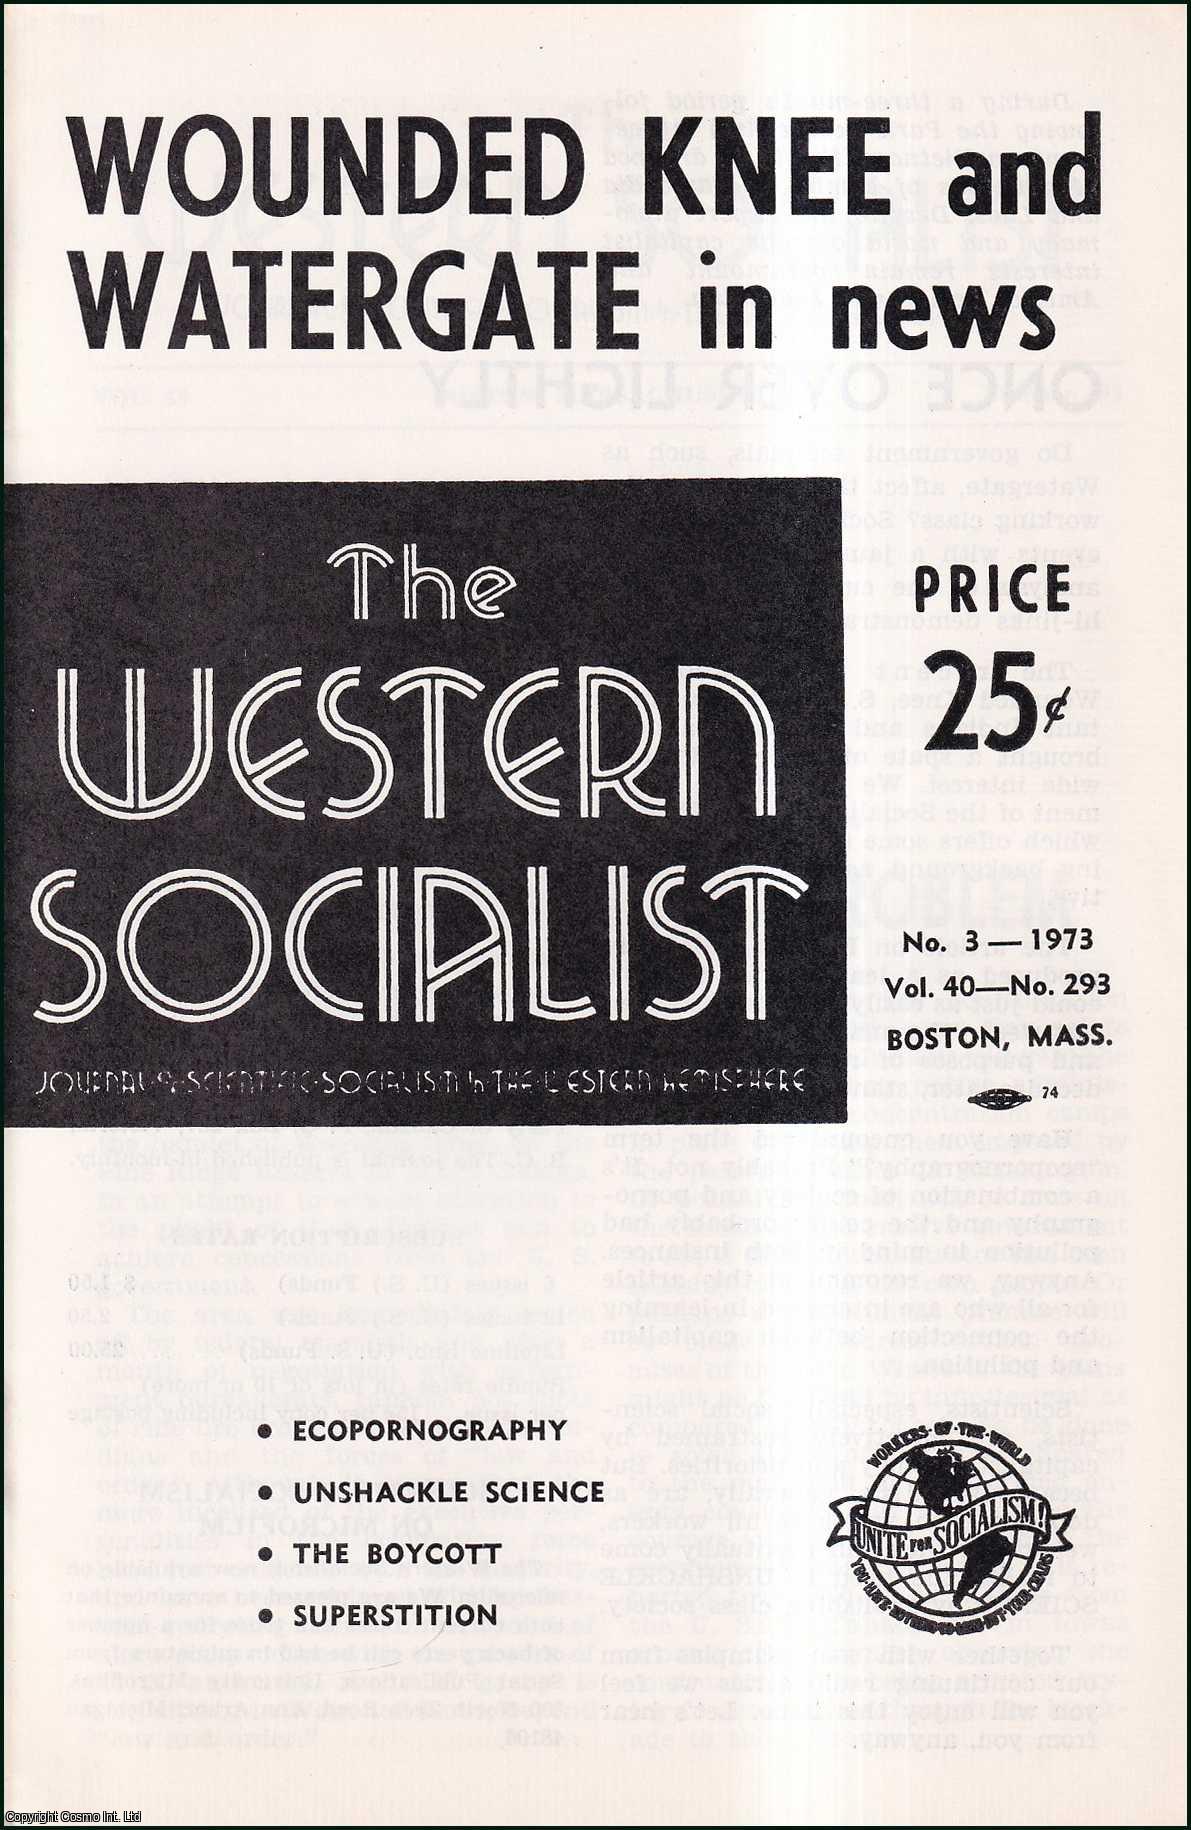 Western Socialist - The Watergate Scandals, and other articles: Issue No. 3 of the Western Socialist, 1973.